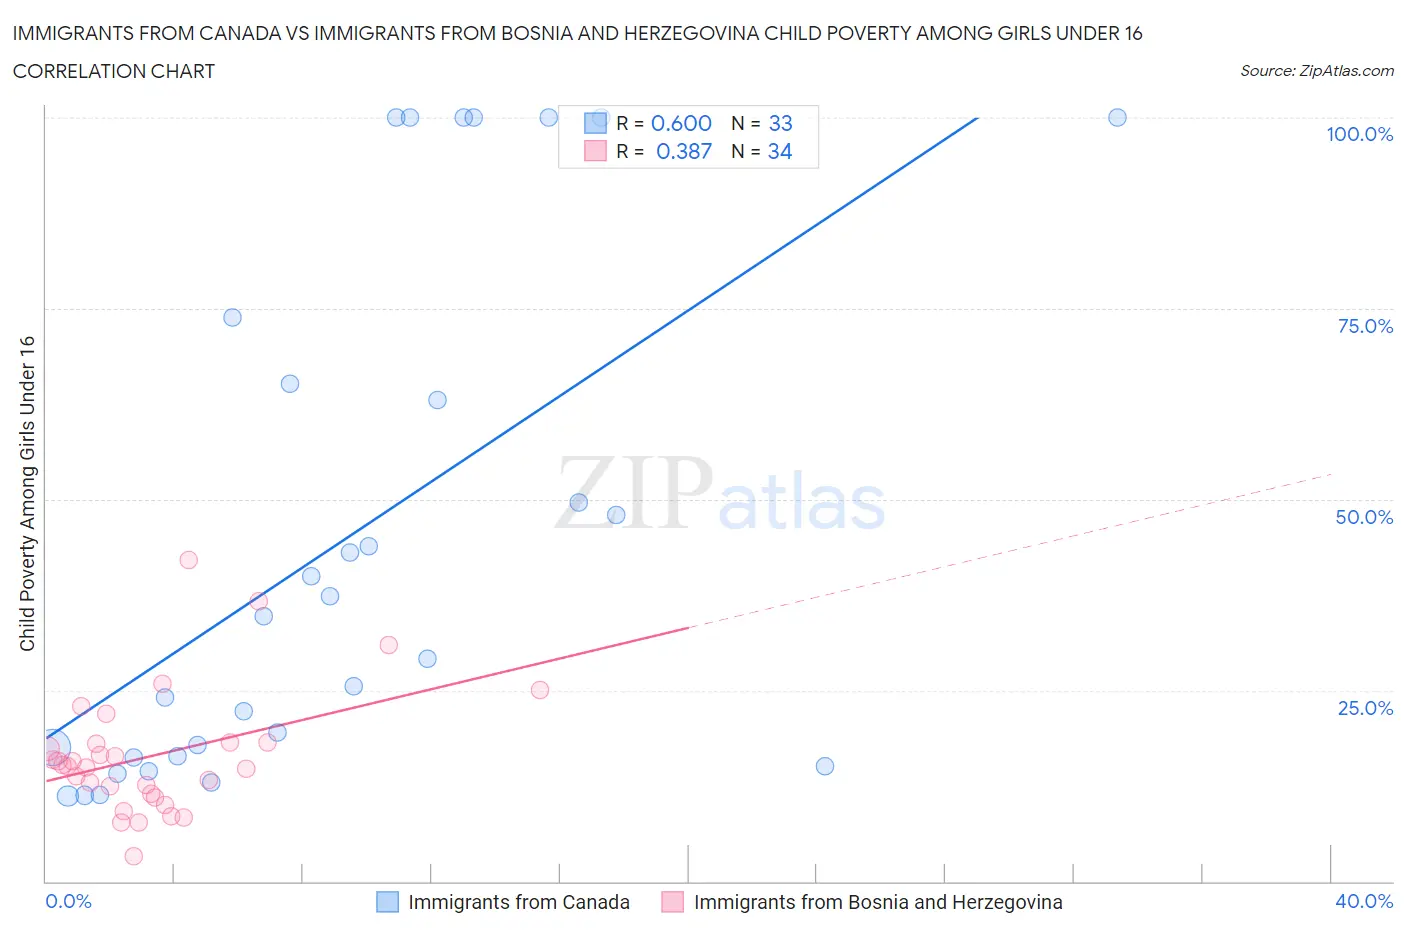 Immigrants from Canada vs Immigrants from Bosnia and Herzegovina Child Poverty Among Girls Under 16